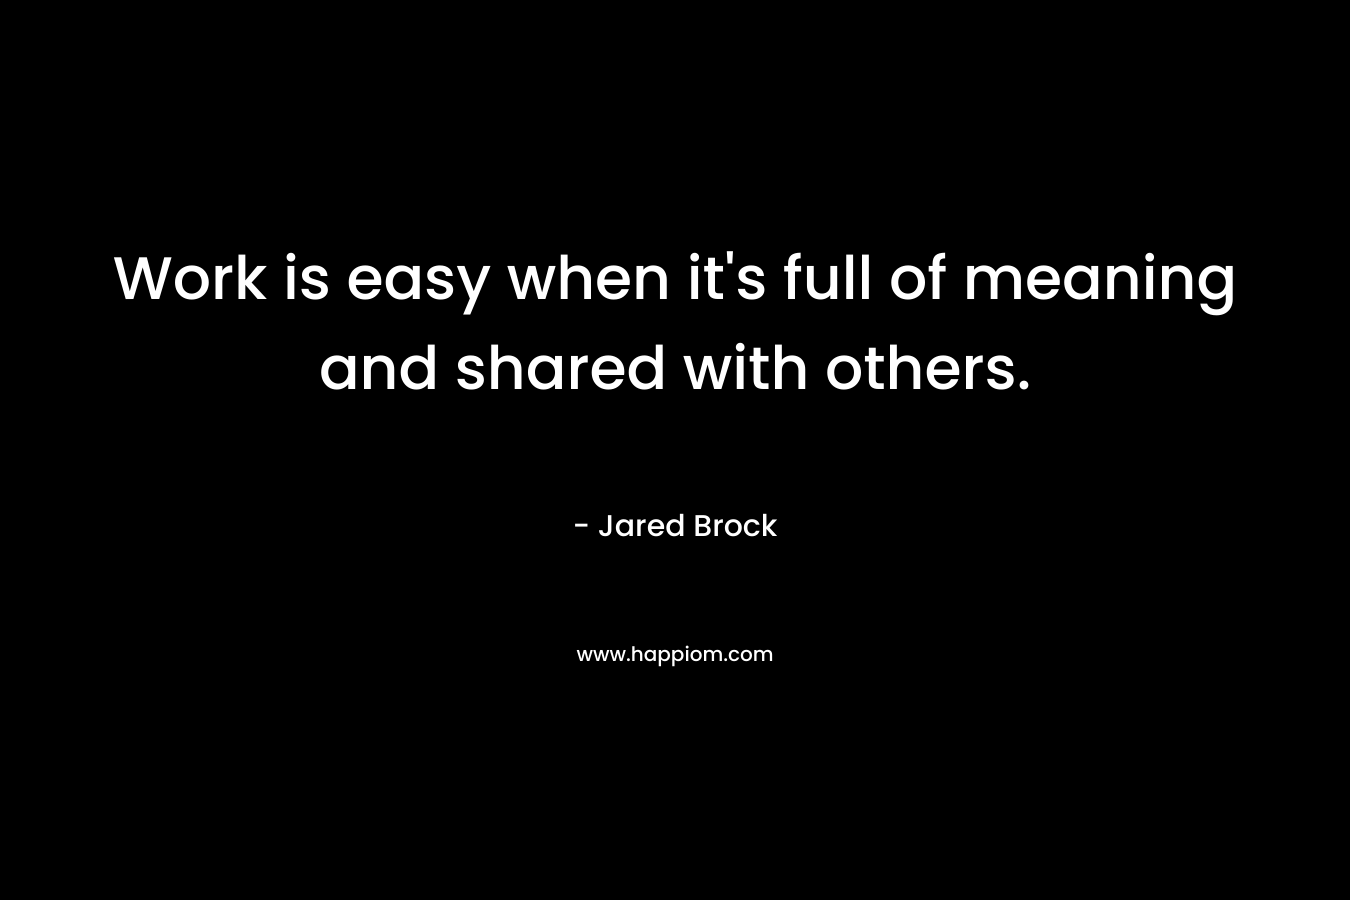 Work is easy when it’s full of meaning and shared with others. – Jared Brock